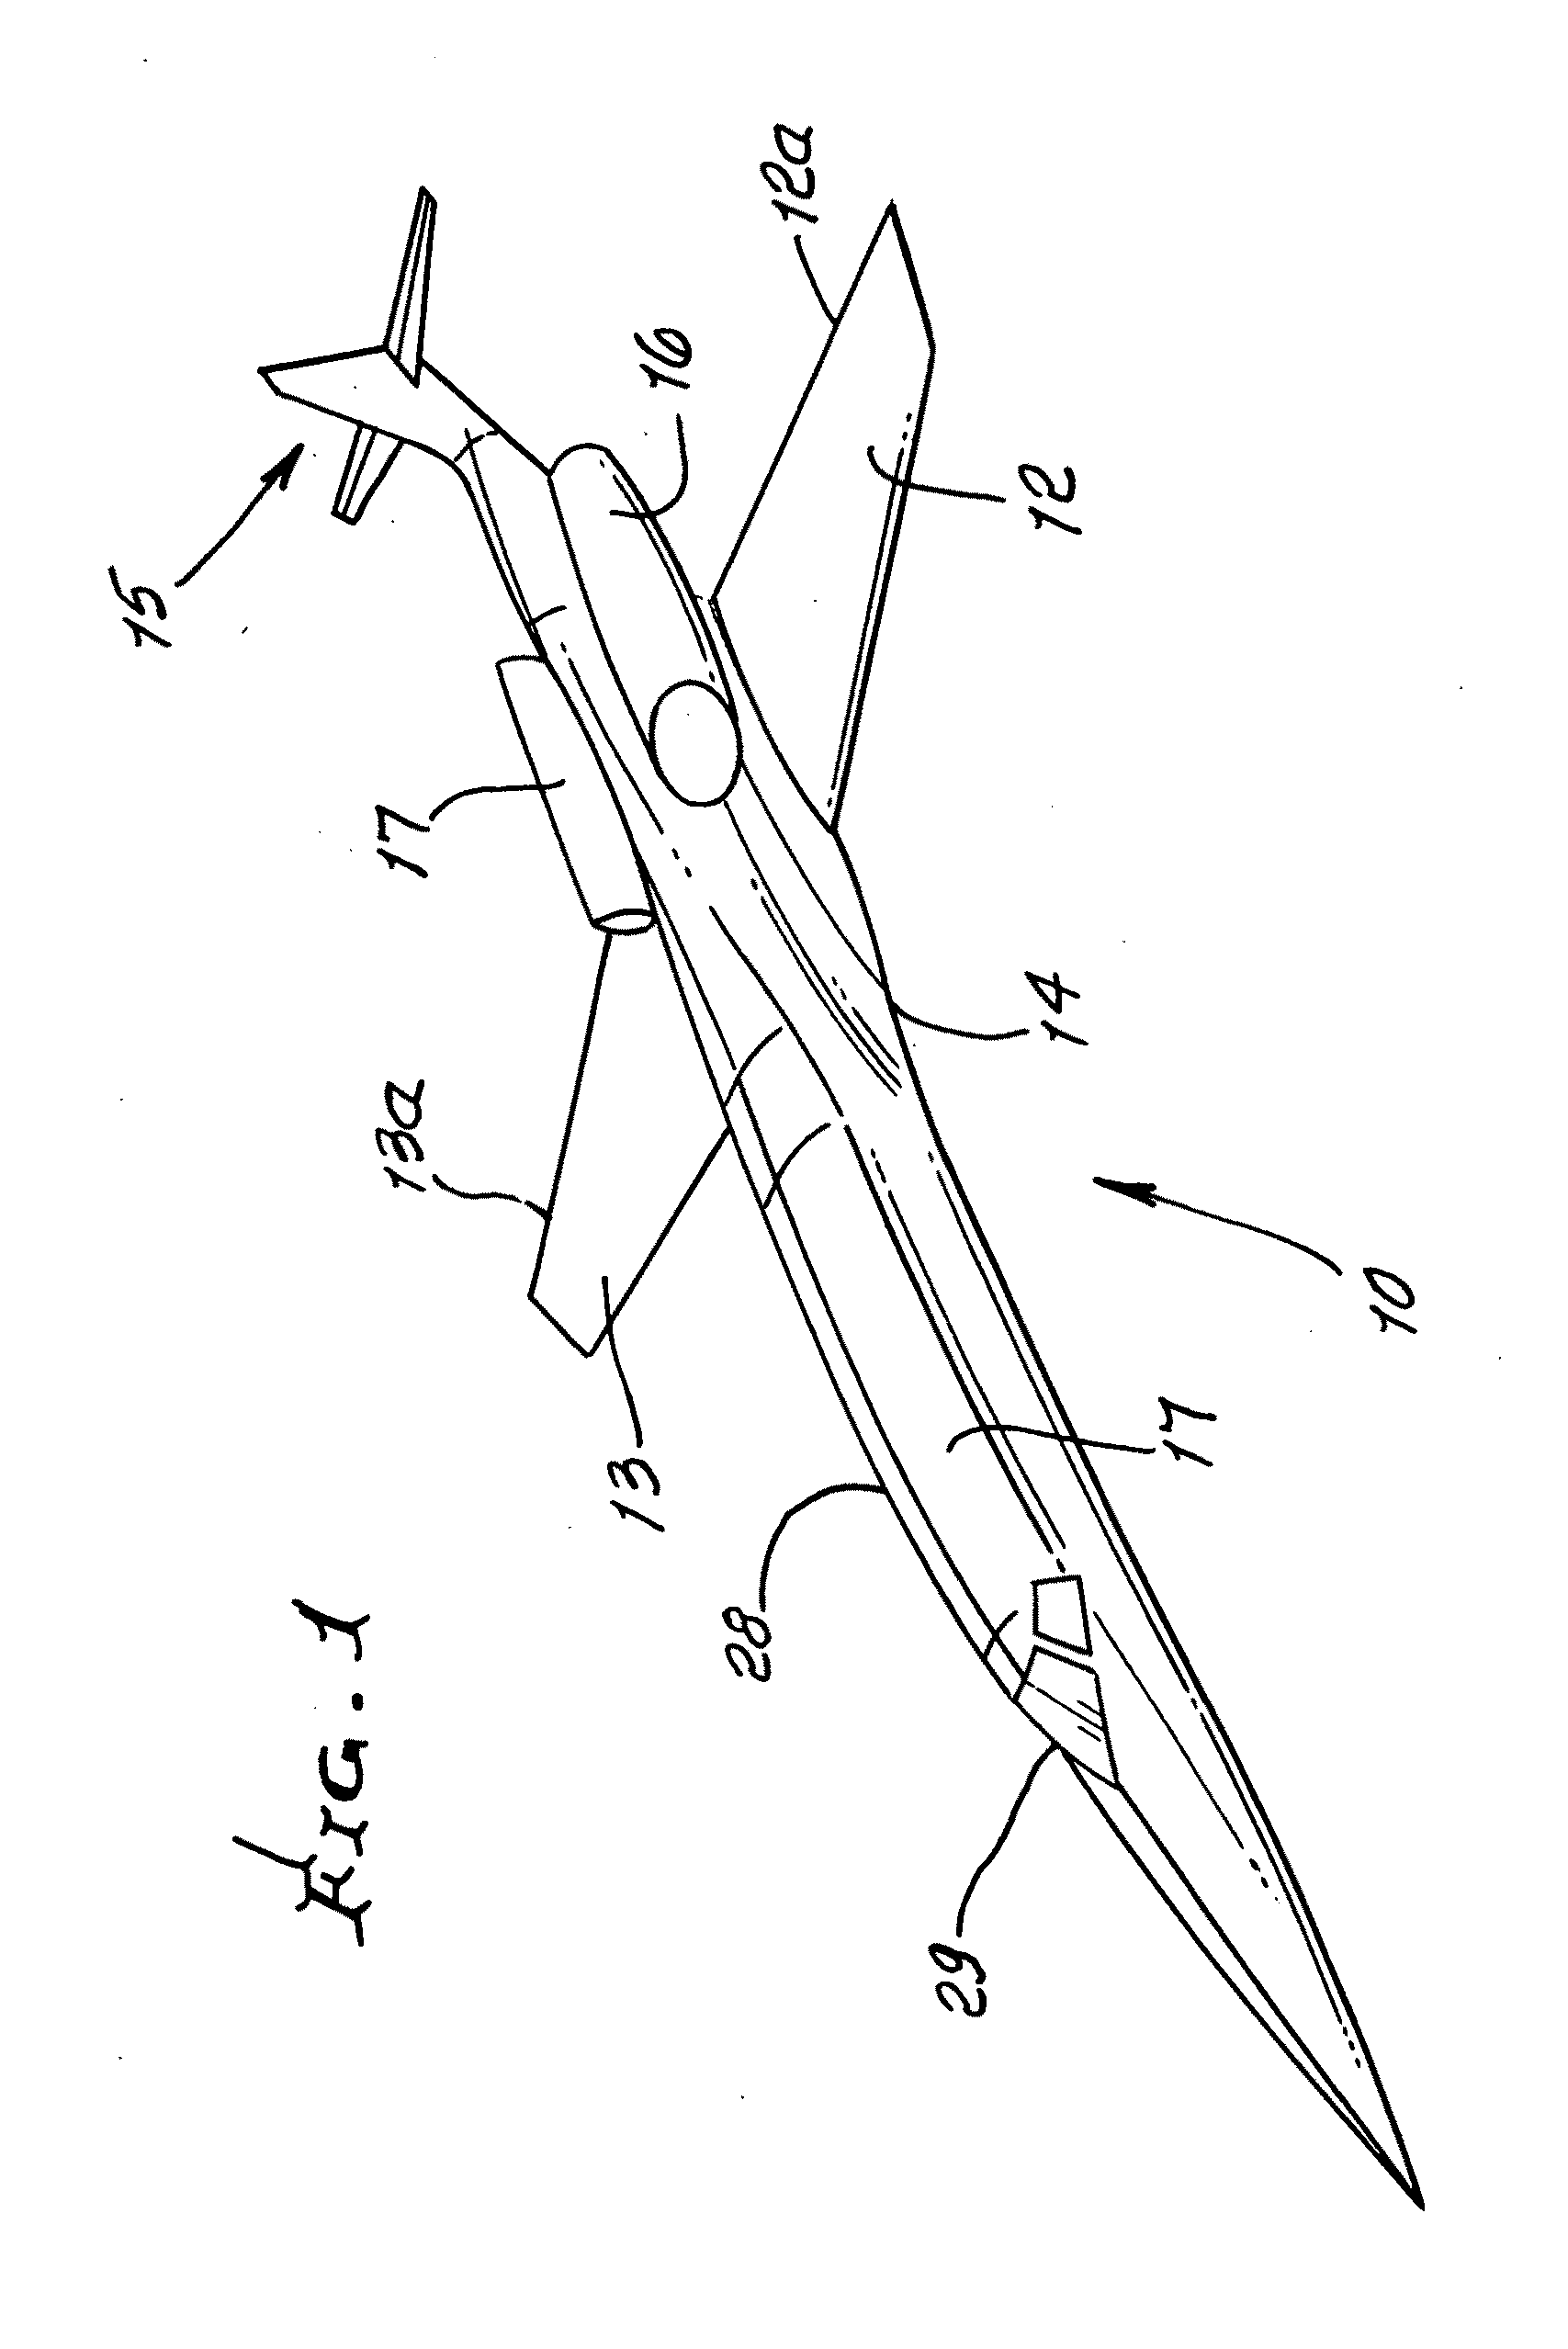 Laminar flow wing optimized for supersonic cruise aircraft